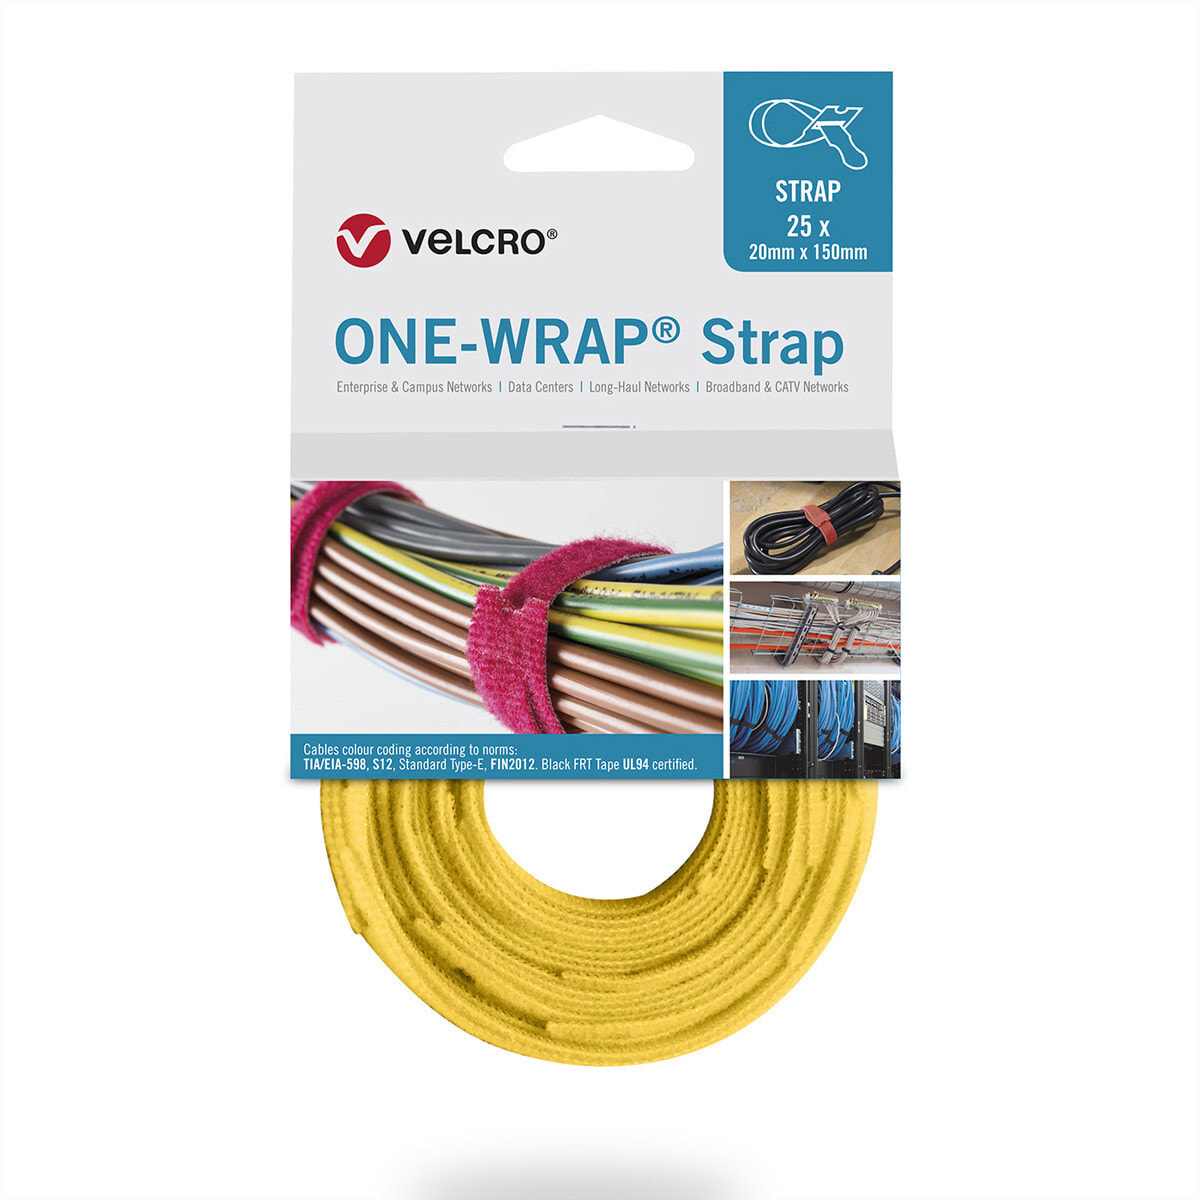 VELCRO ONE-WRAP - Releasable cable tie - Polypropylene (PP) - Velcro - Yellow - 300 mm - 25 mm - 25 pc(s)